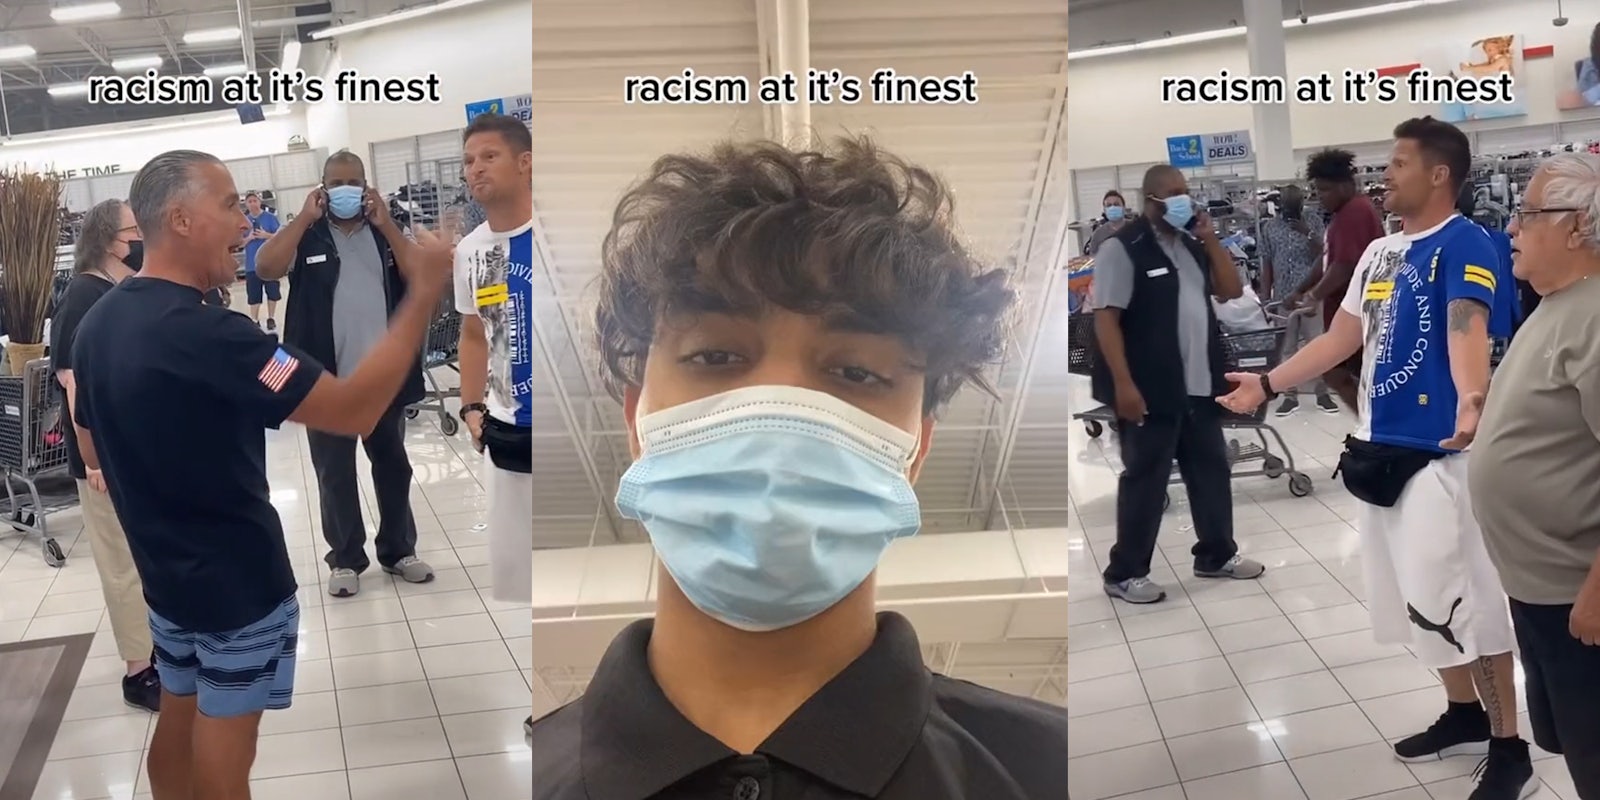 man gesturing and yelling in a store (l) young man in mask (c) man with arms outstretched (r) all with caption 'racism at it's finest'